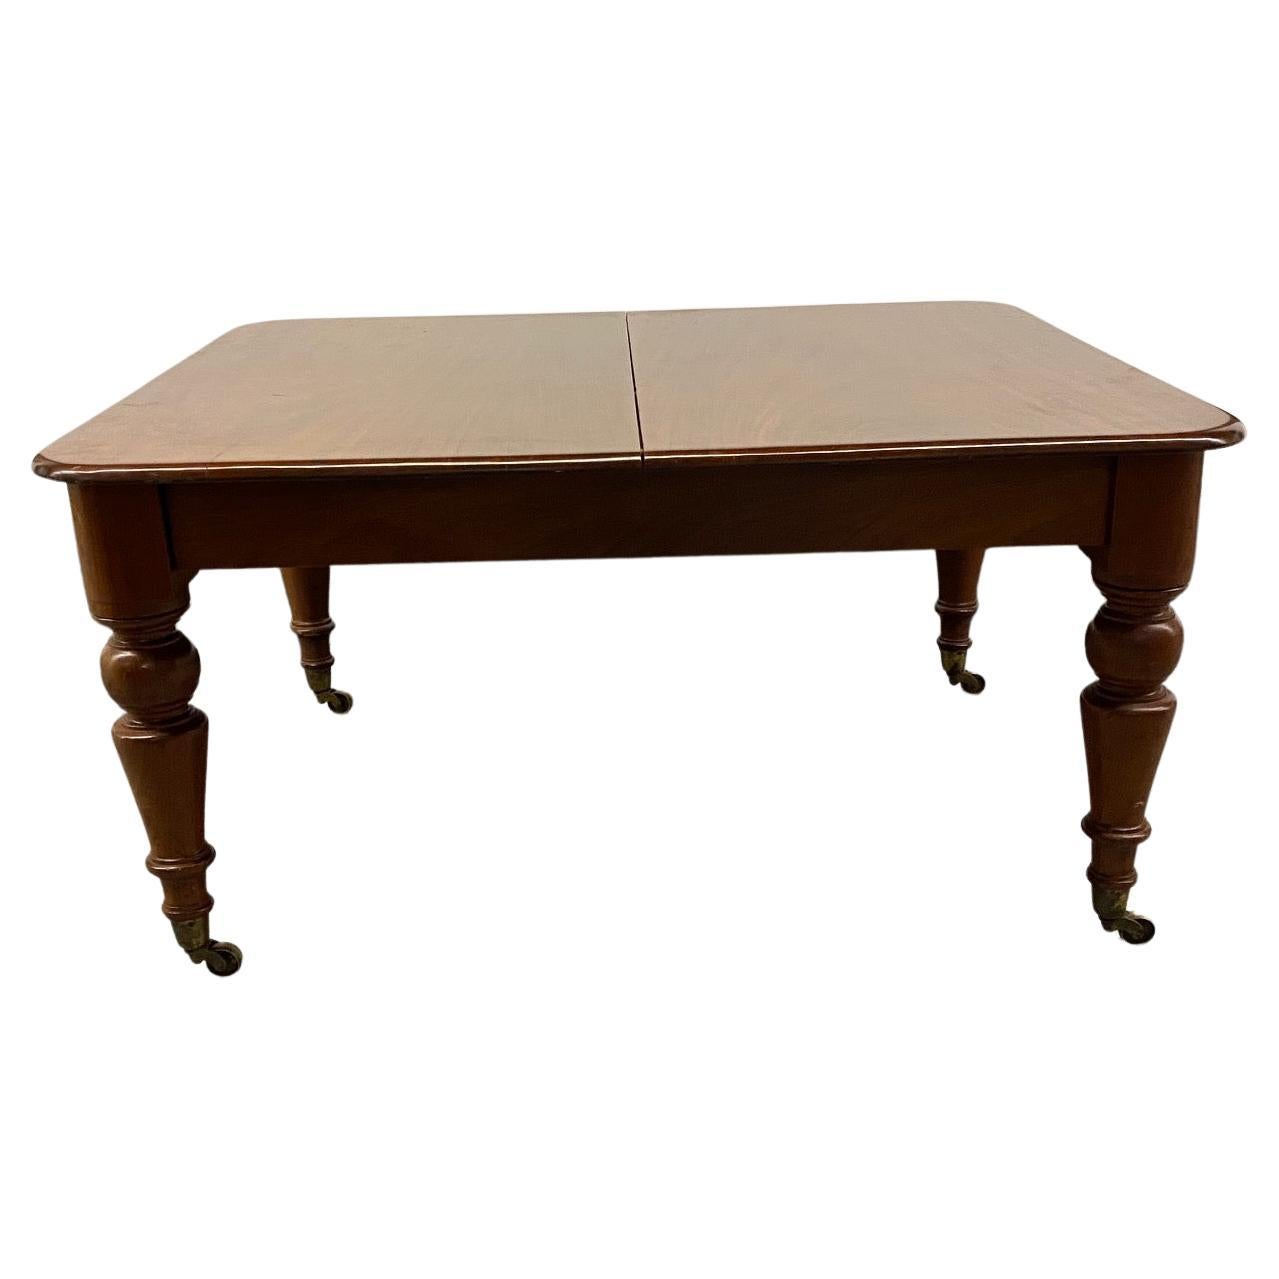 Rare Mahogany Samuel Hawkins crank dining table including 3 leaves. 118 inches when fully extended and 23 inches height under the skirt. Bearing brass medallion 